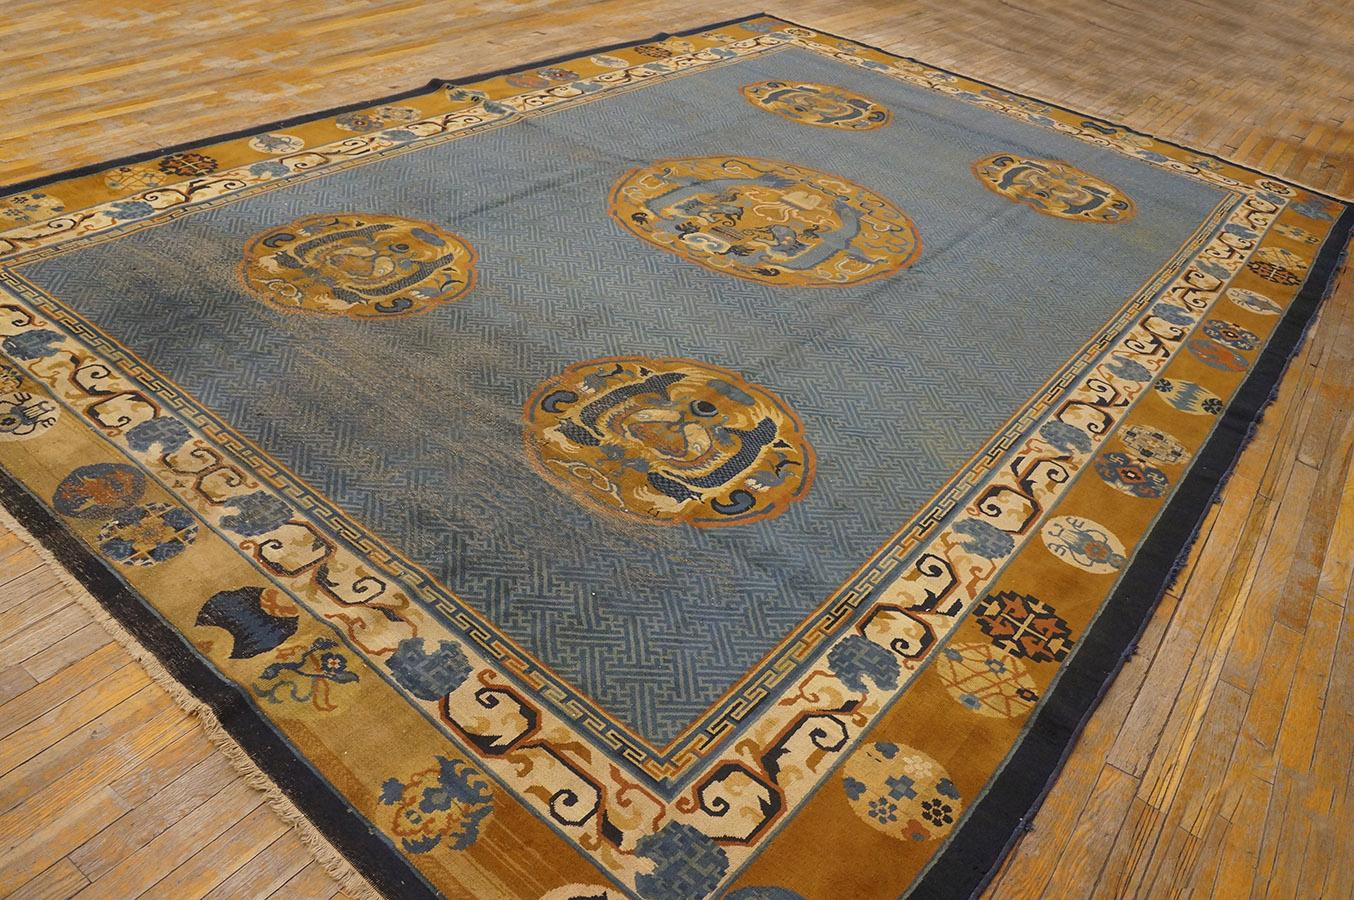 Antique Chinese rug, size: 9'10